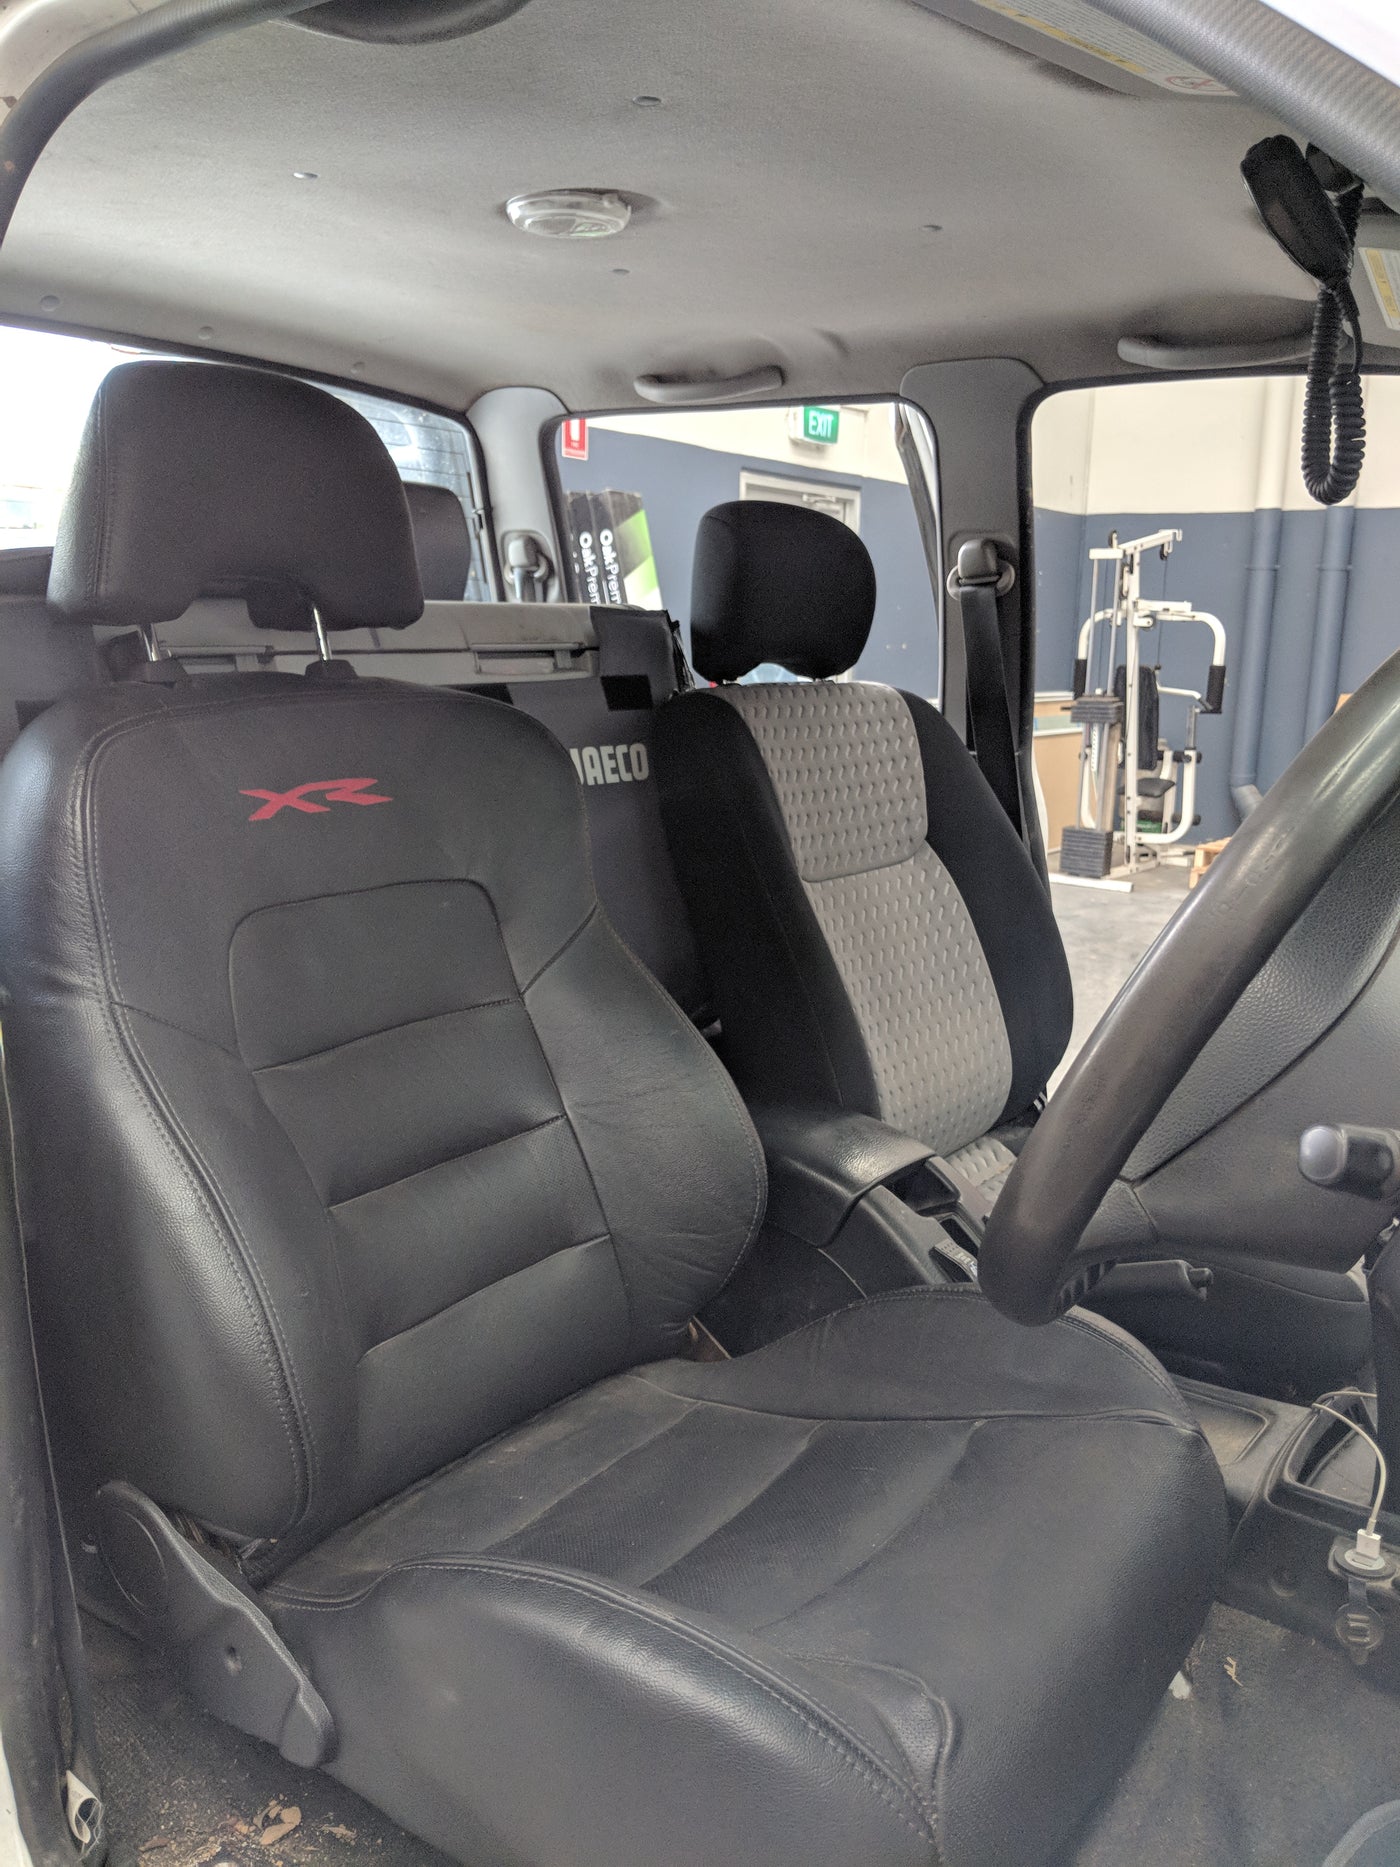 Navara Seat Adapter Kit - Currently out of stock, next batch shipping July 2024